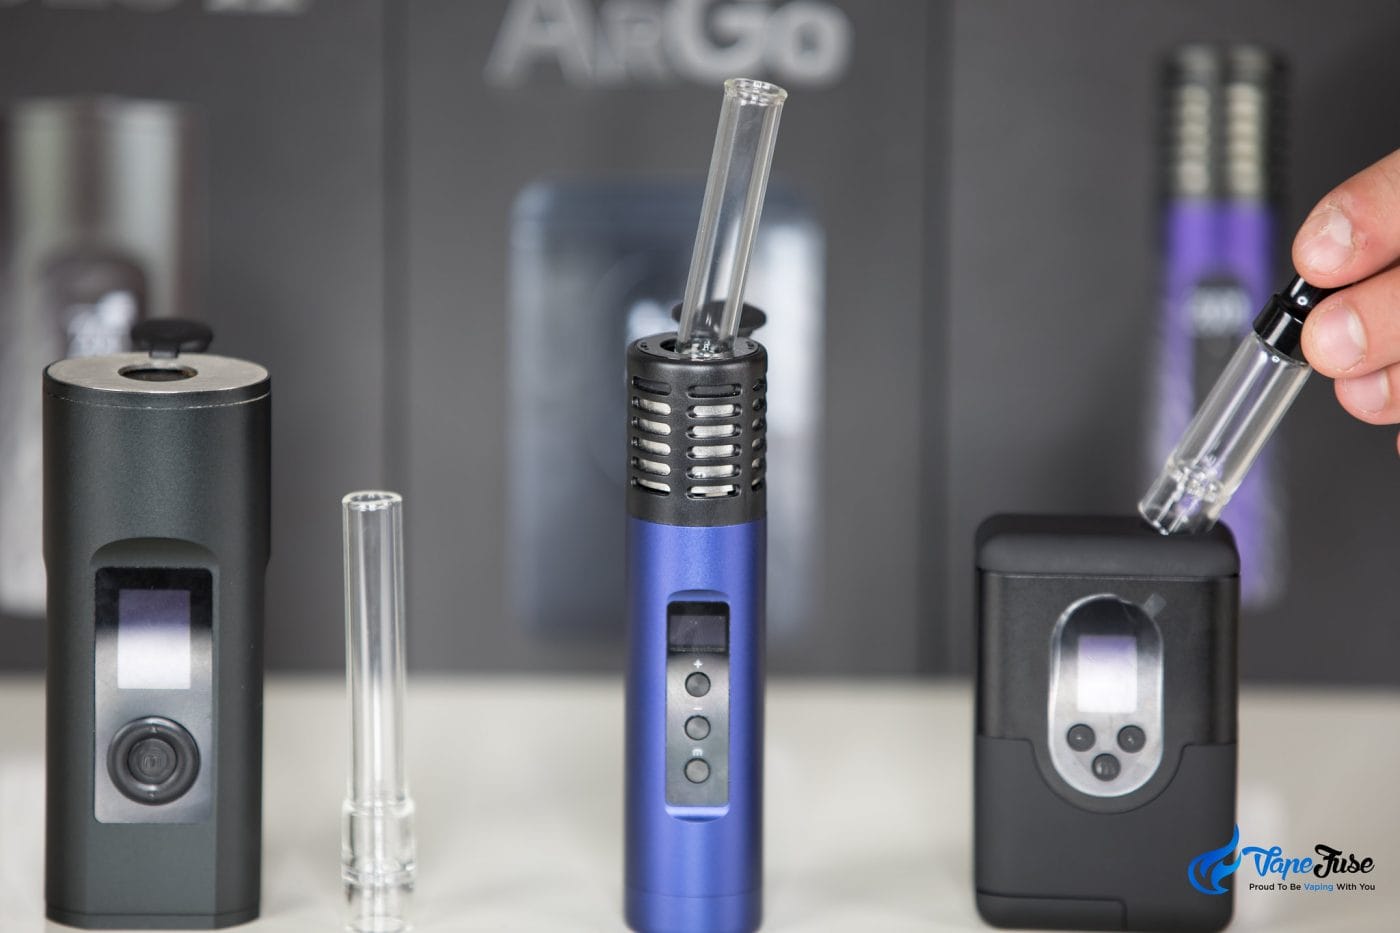 ArGo has a different size aroma tube